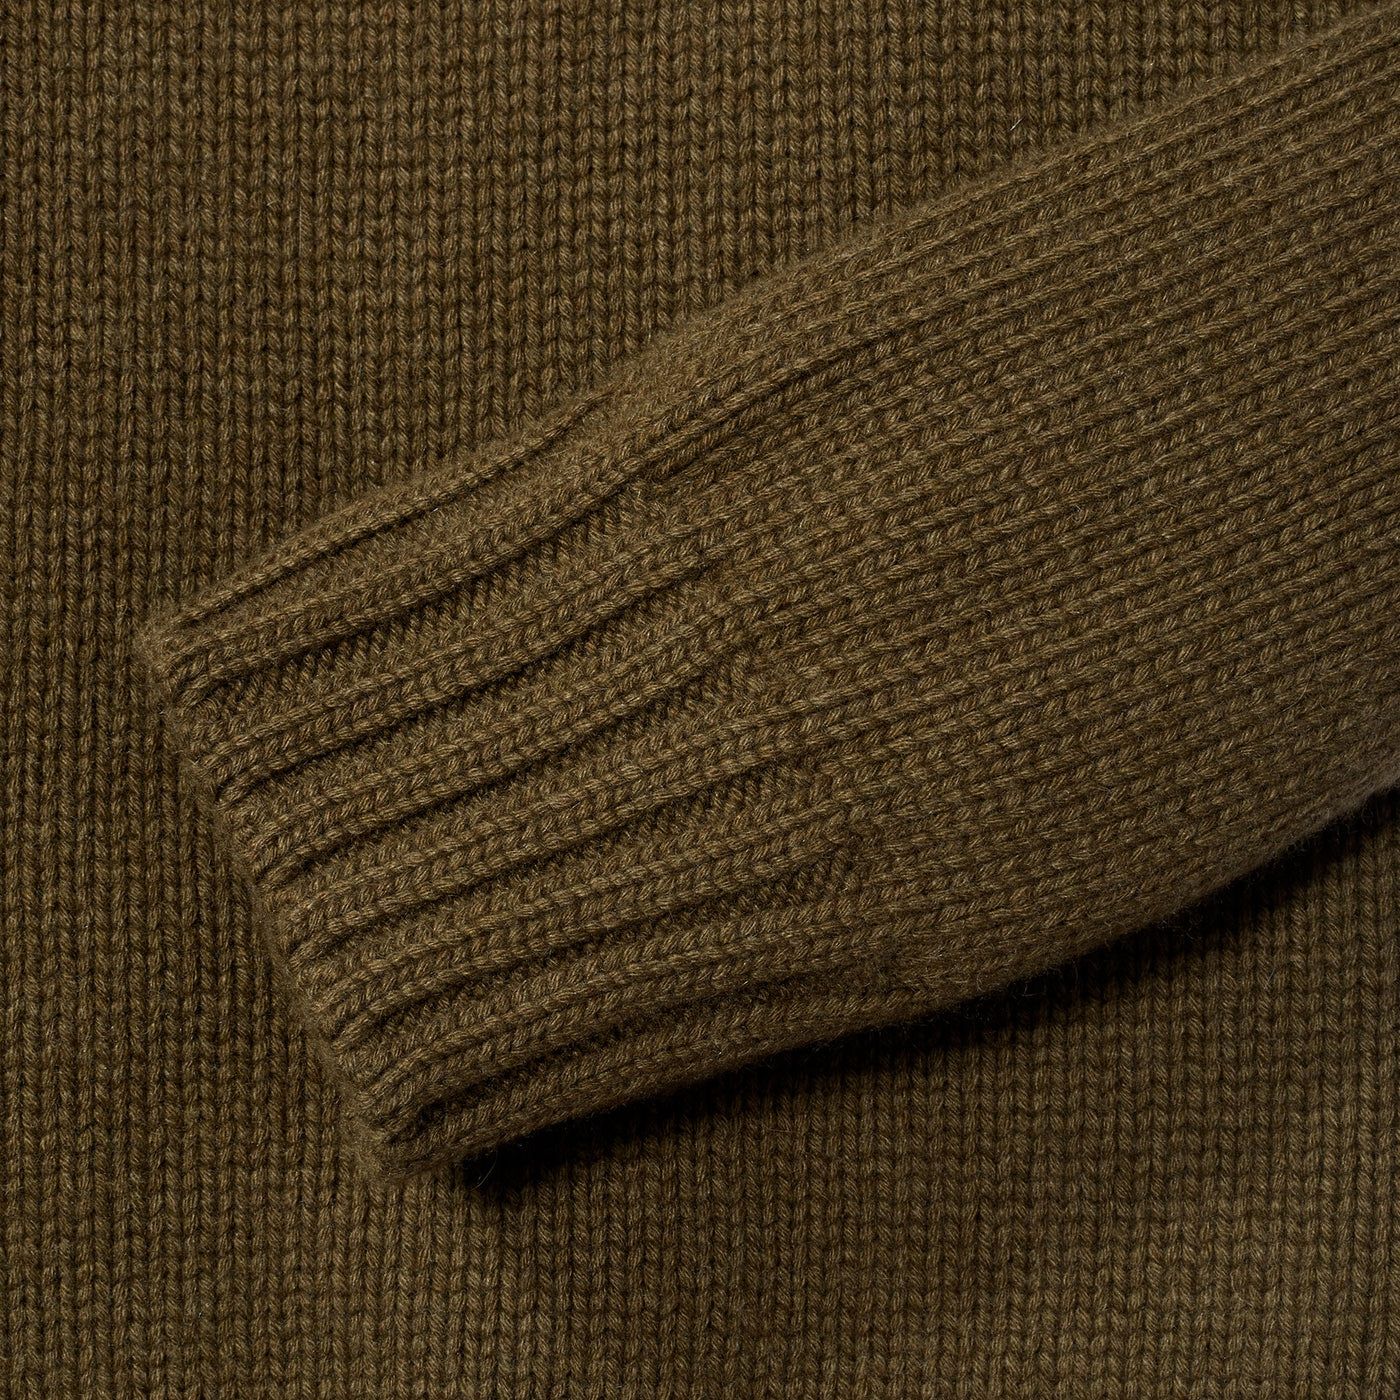 Oversized Roll Neck Sweater - Olive